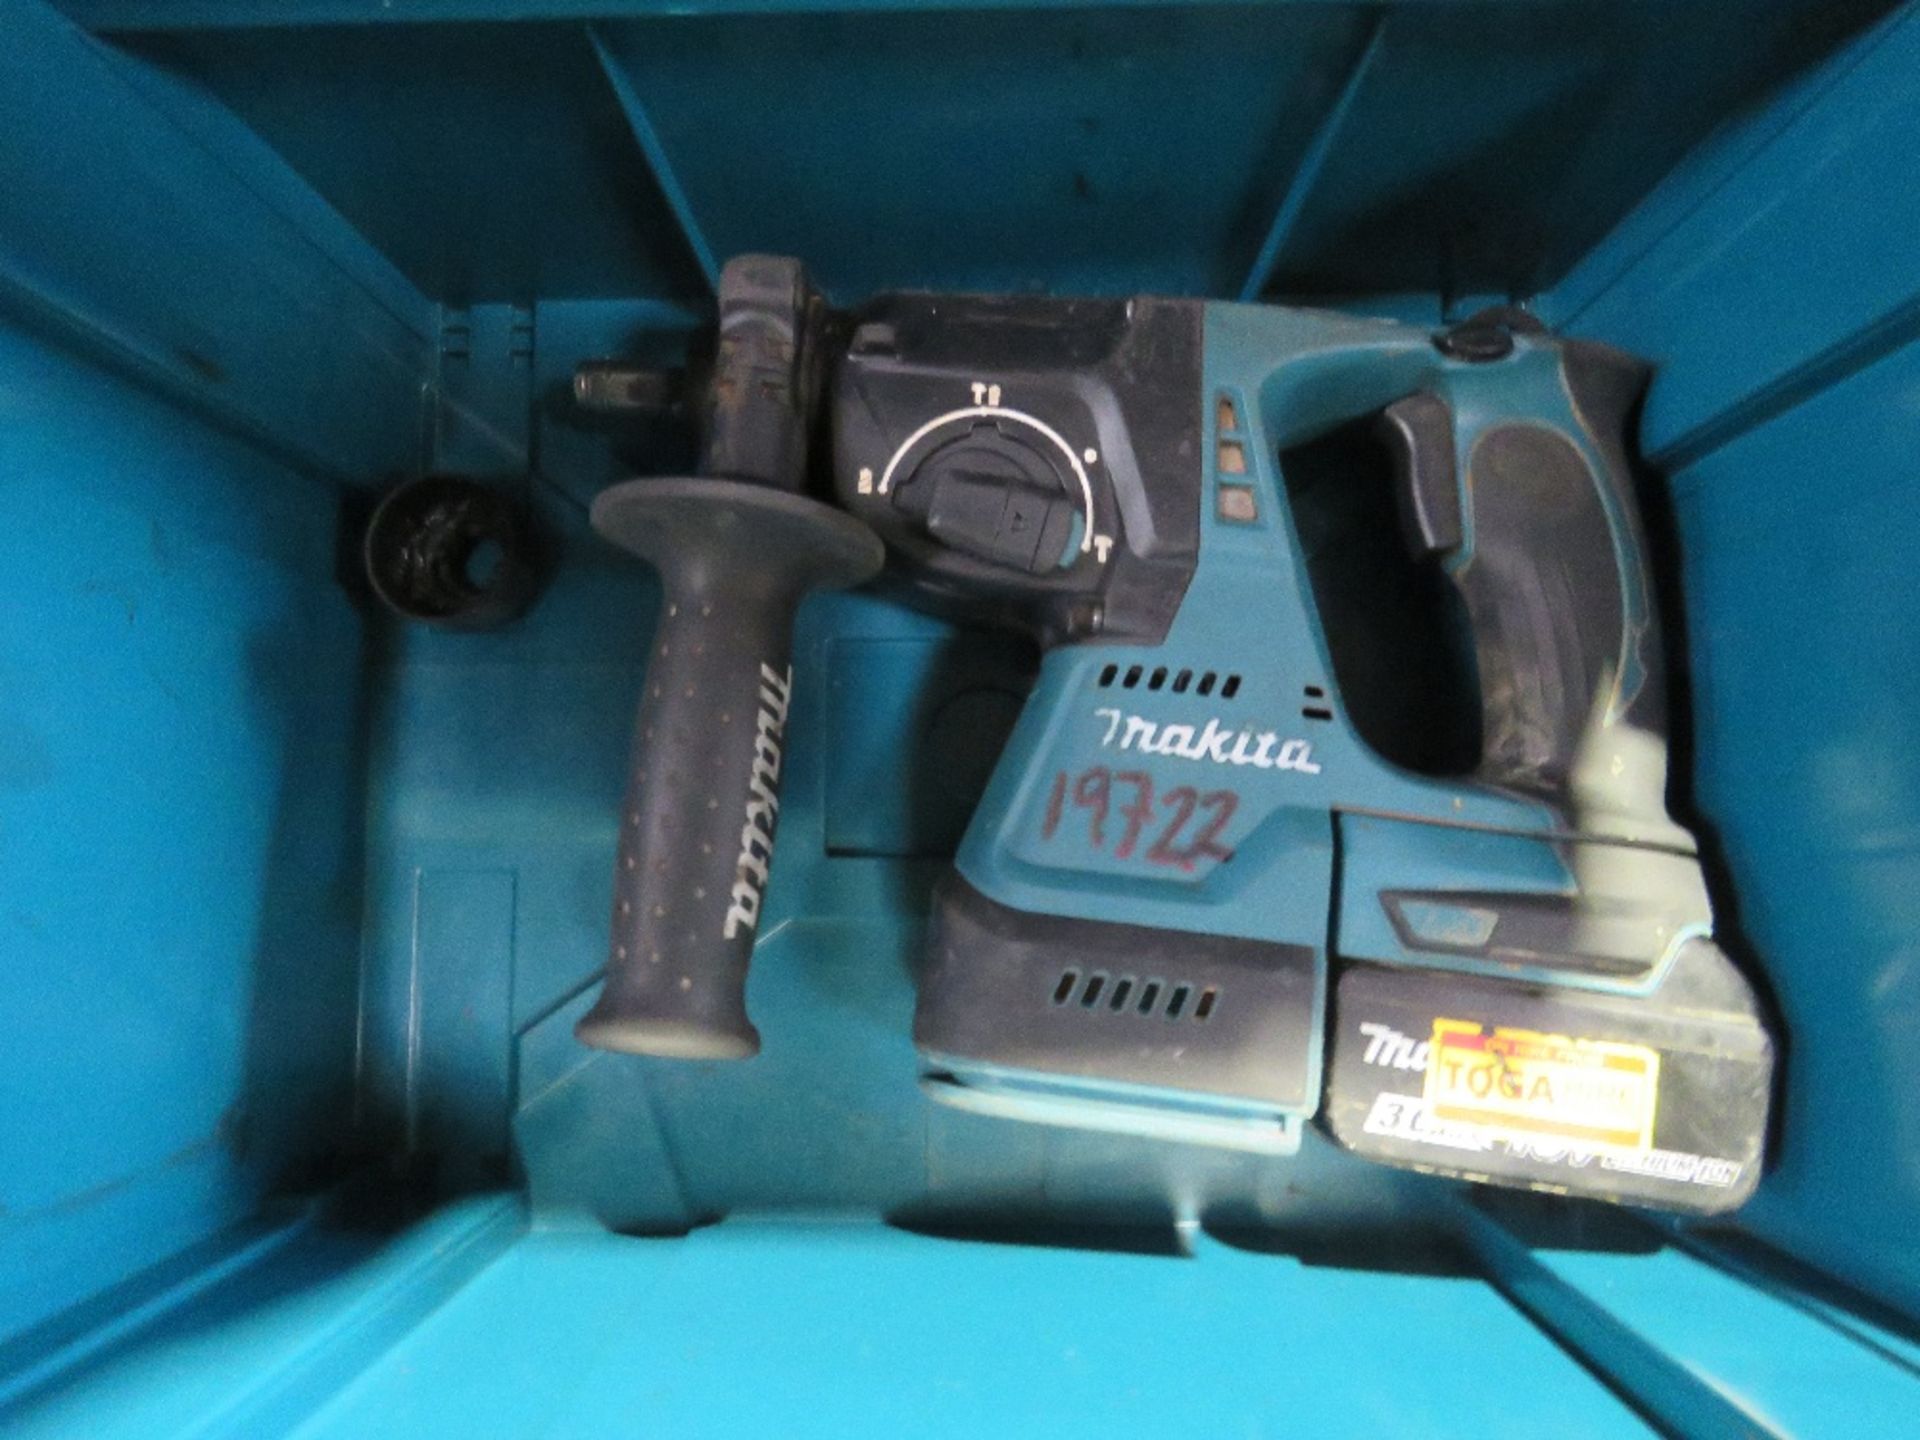 3 X MAKITA BATTERY POWER TOOLS, INCOMPLETE: GRINDER, RECIP SAW, DRILL. - Image 2 of 4